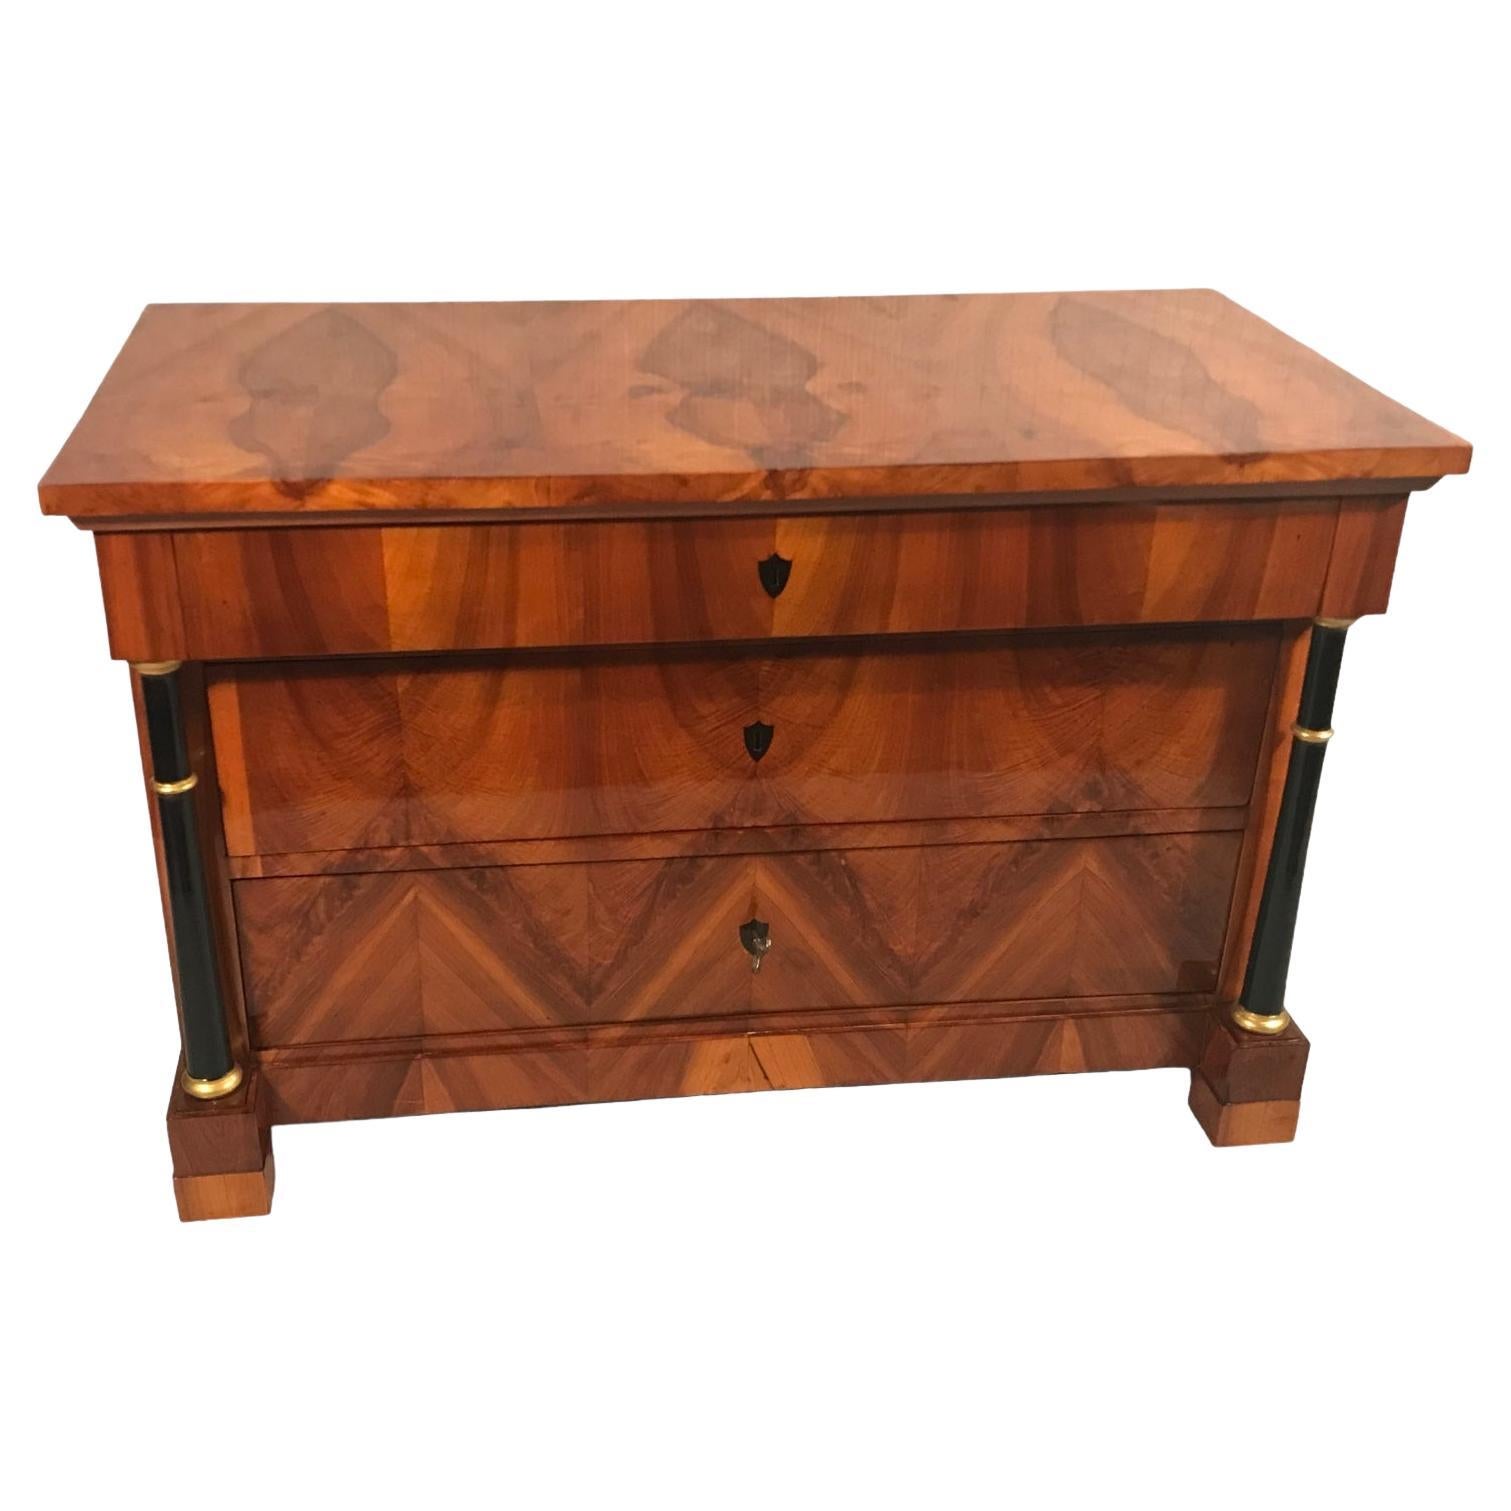 If you’re looking for a stunning antique Biedermeier chest of drawers, this piece from Southern Germany is a must-have. Dating back to around 1820, it features a unique three-drawer design and a beautiful walnut veneer grain that really stands out.